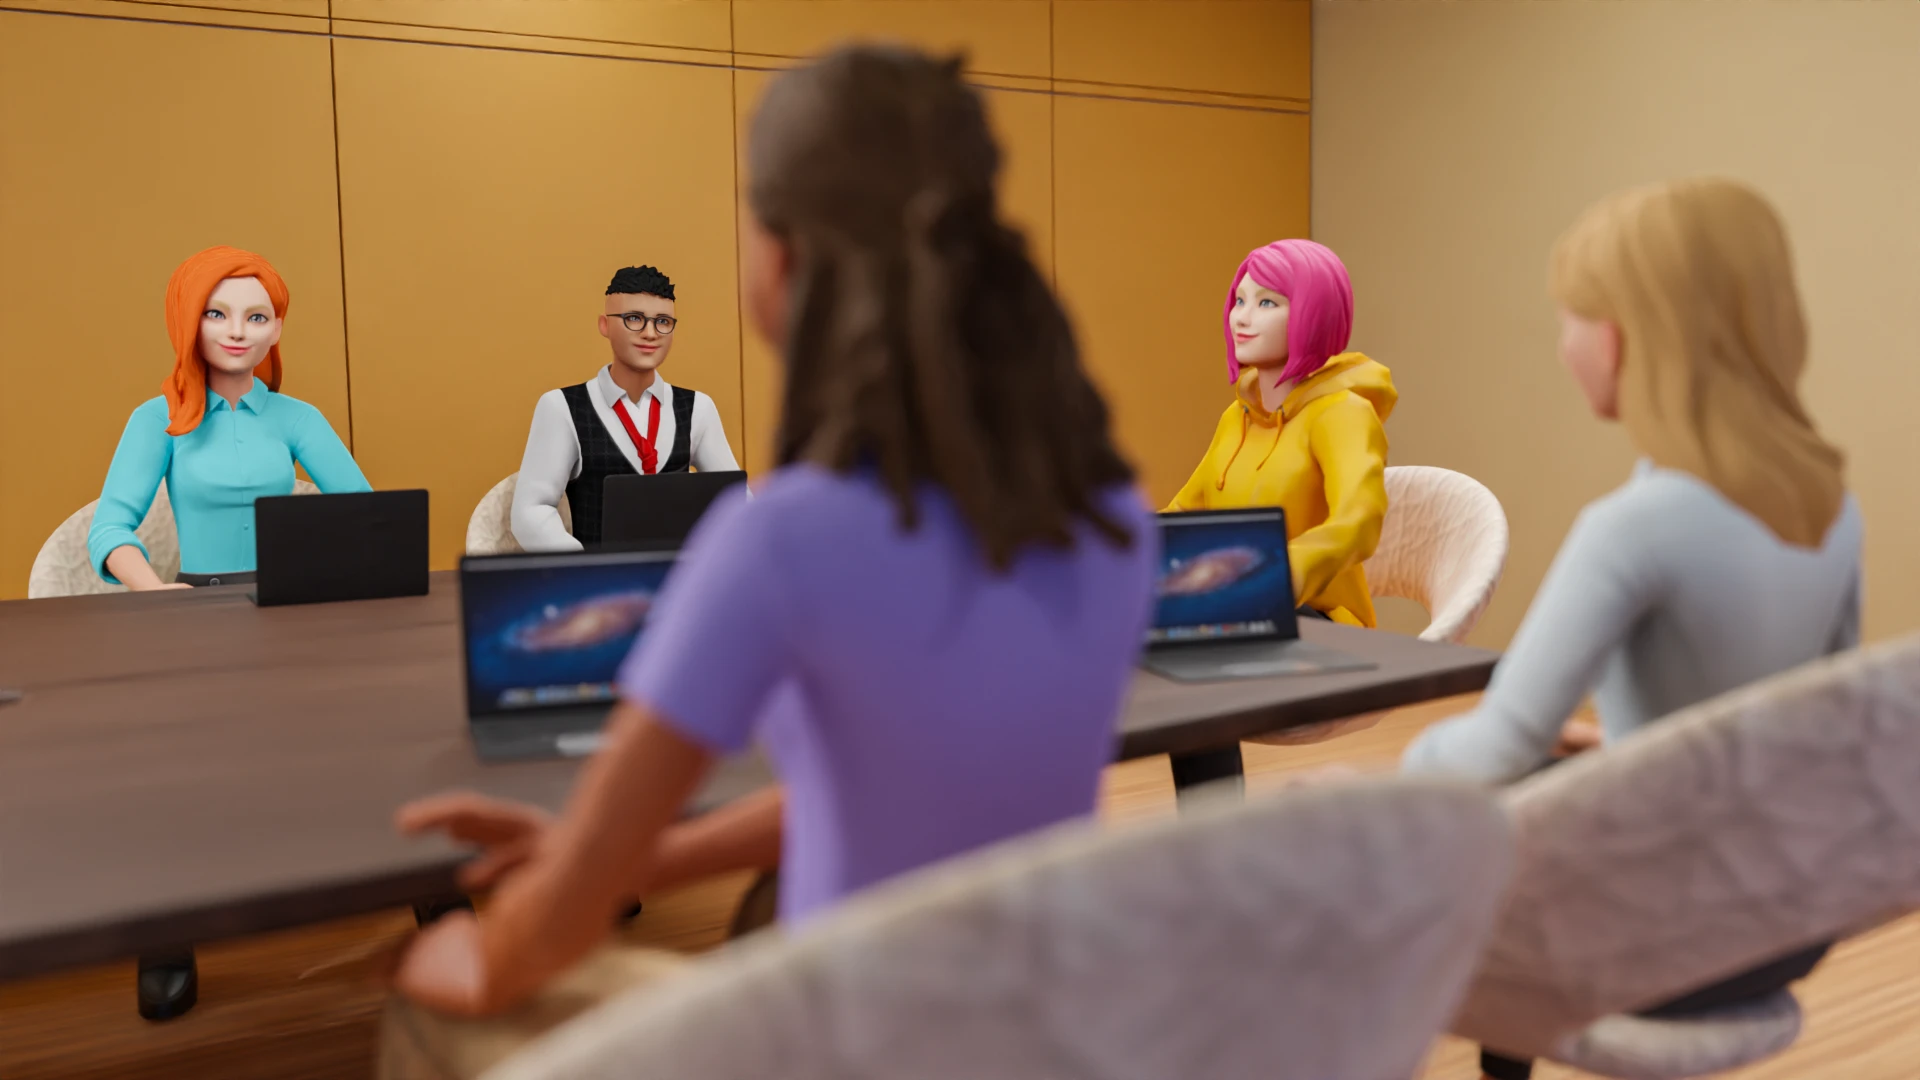 Virtual Meetings In Metaverse: The Future of Work and Events